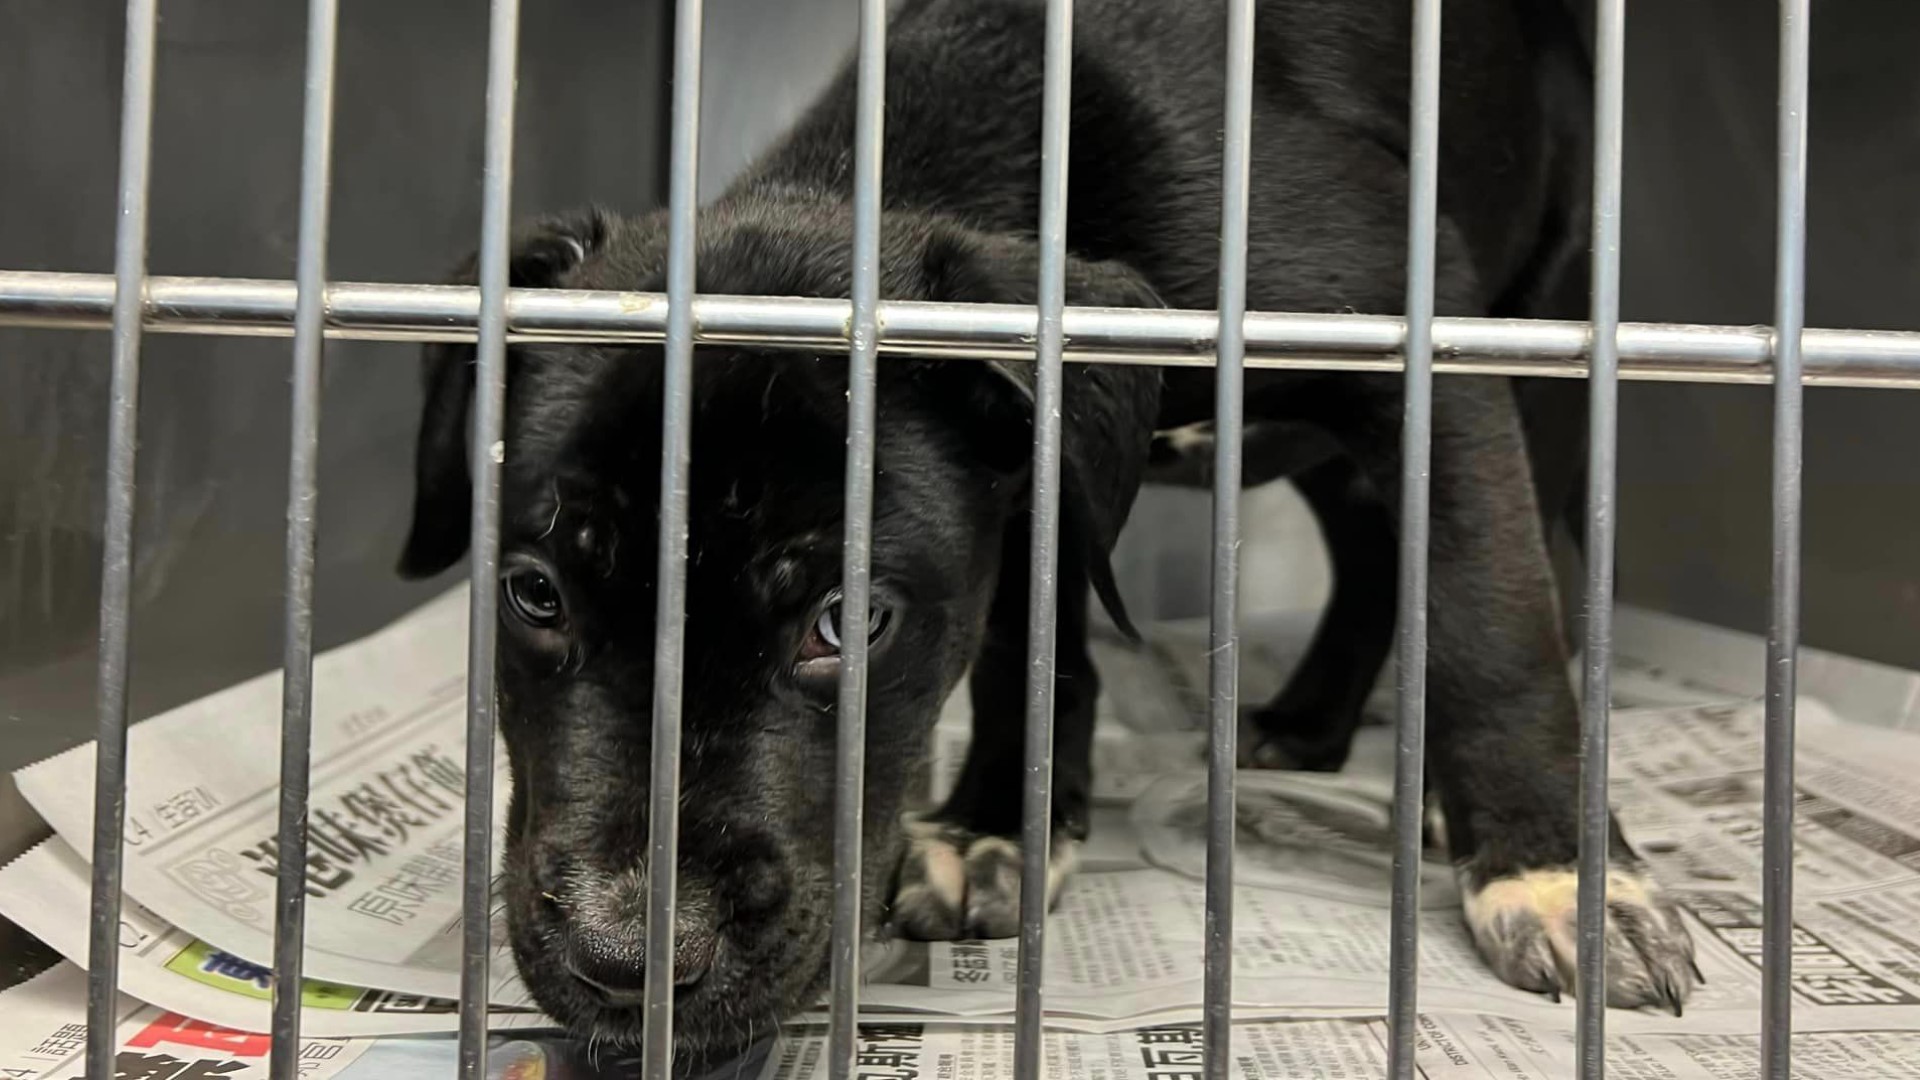 The animal shelter posted on Instagram Tuesday that they have at least 593 dogs, putting them over capacity.